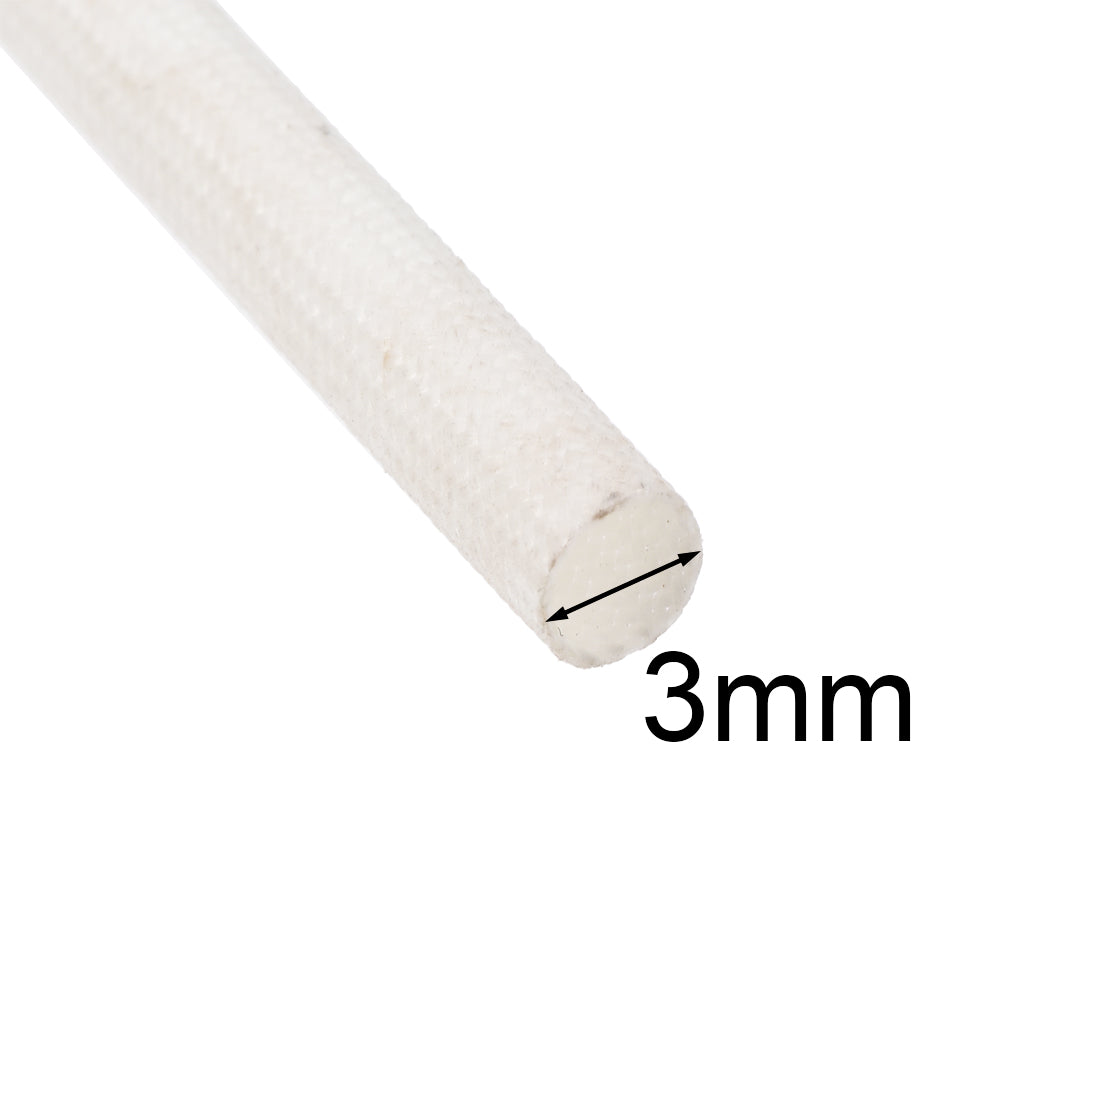 uxcell Uxcell Insulation Cable Protector,16.4Ft-3mm High TEMP Silicone Fiberglass Sleeve White